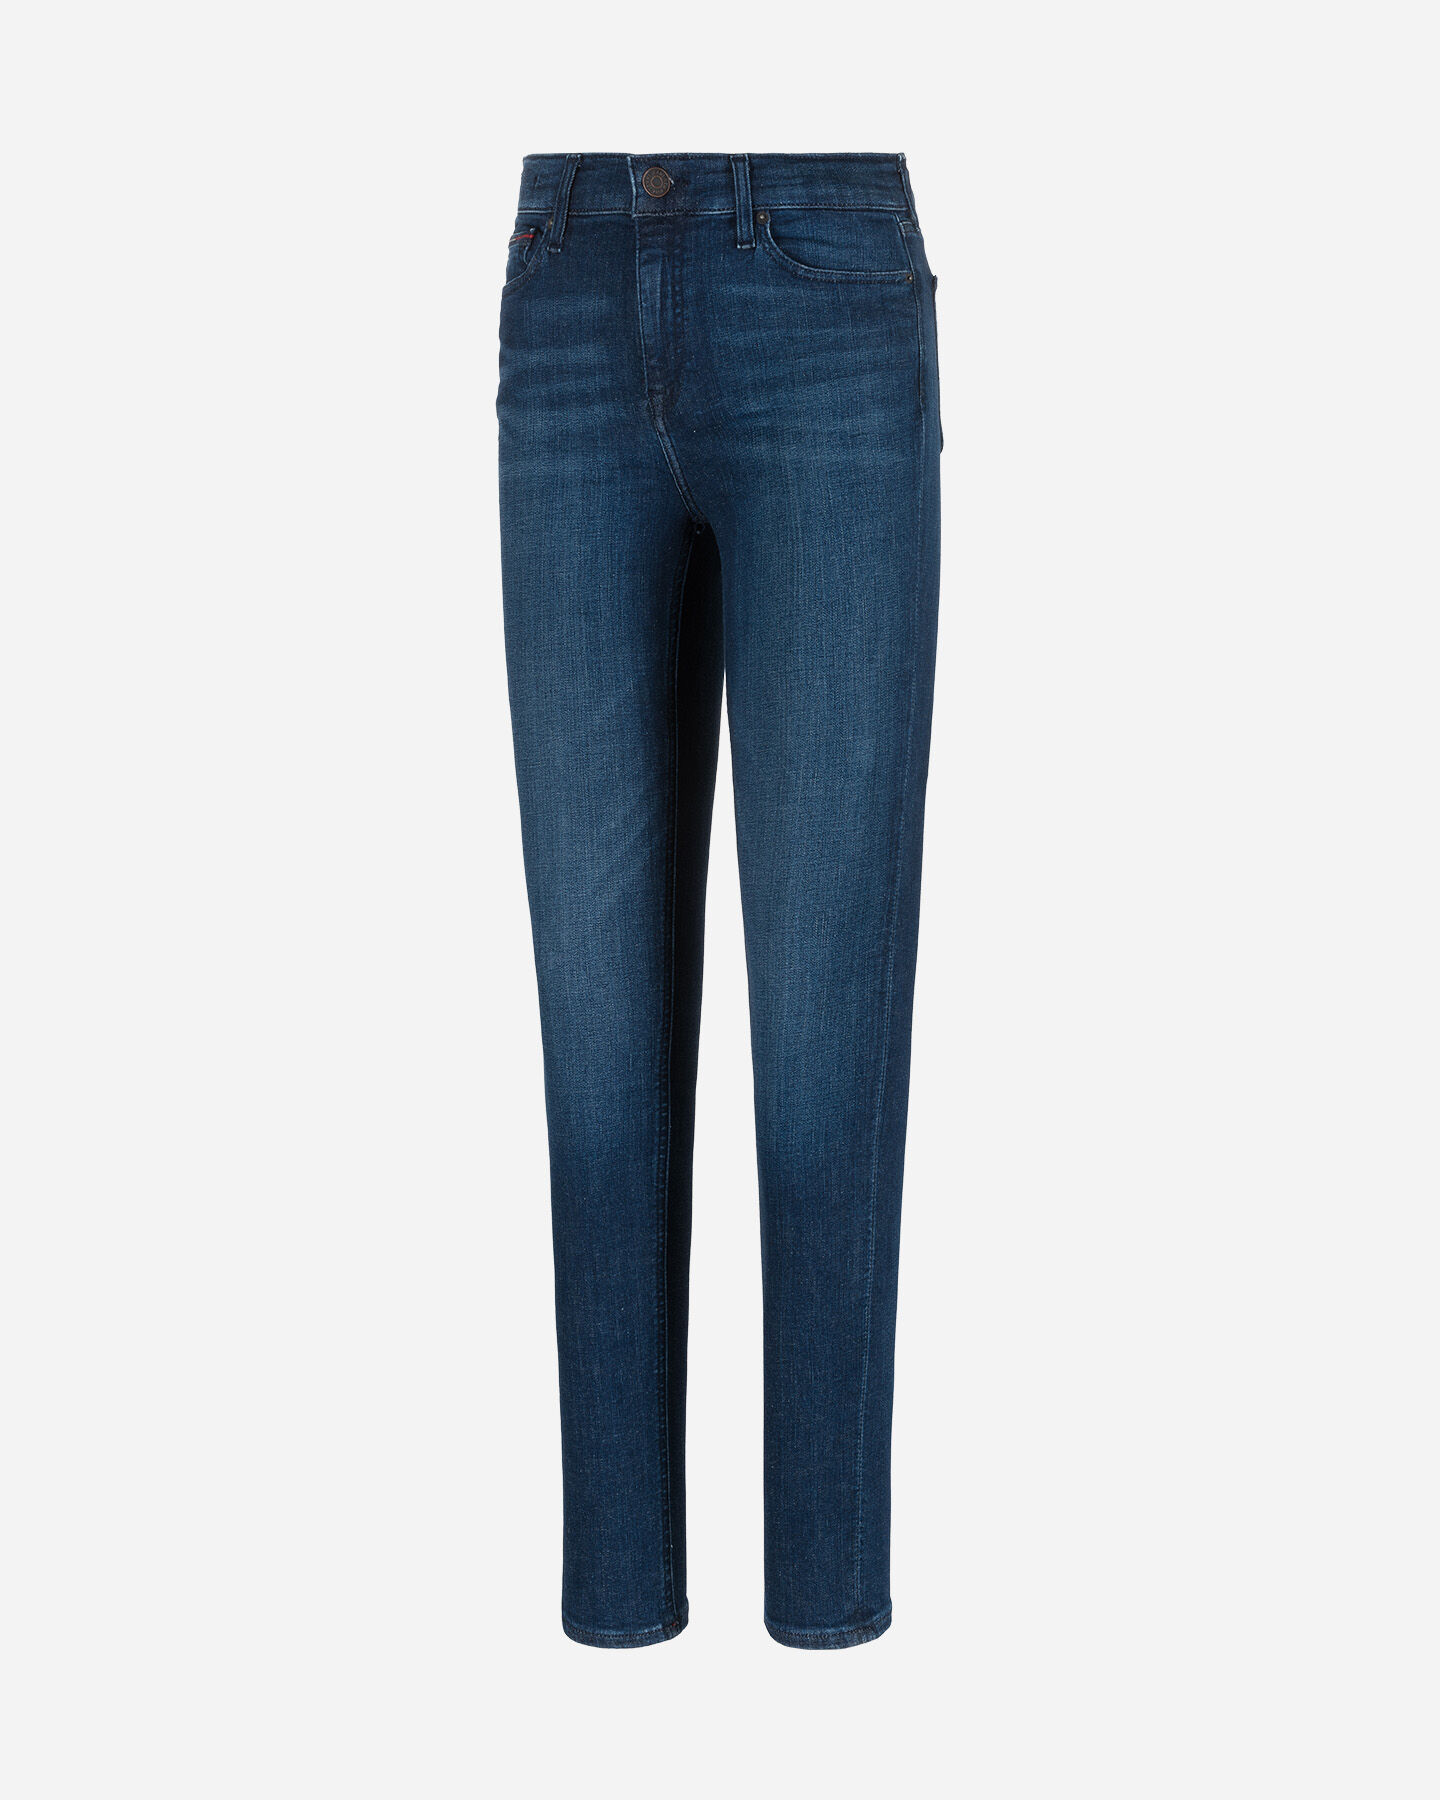  Jeans TOMMY HILFIGER NORA MID RISE SKINNY W S4073584|1BK|27 scatto 4